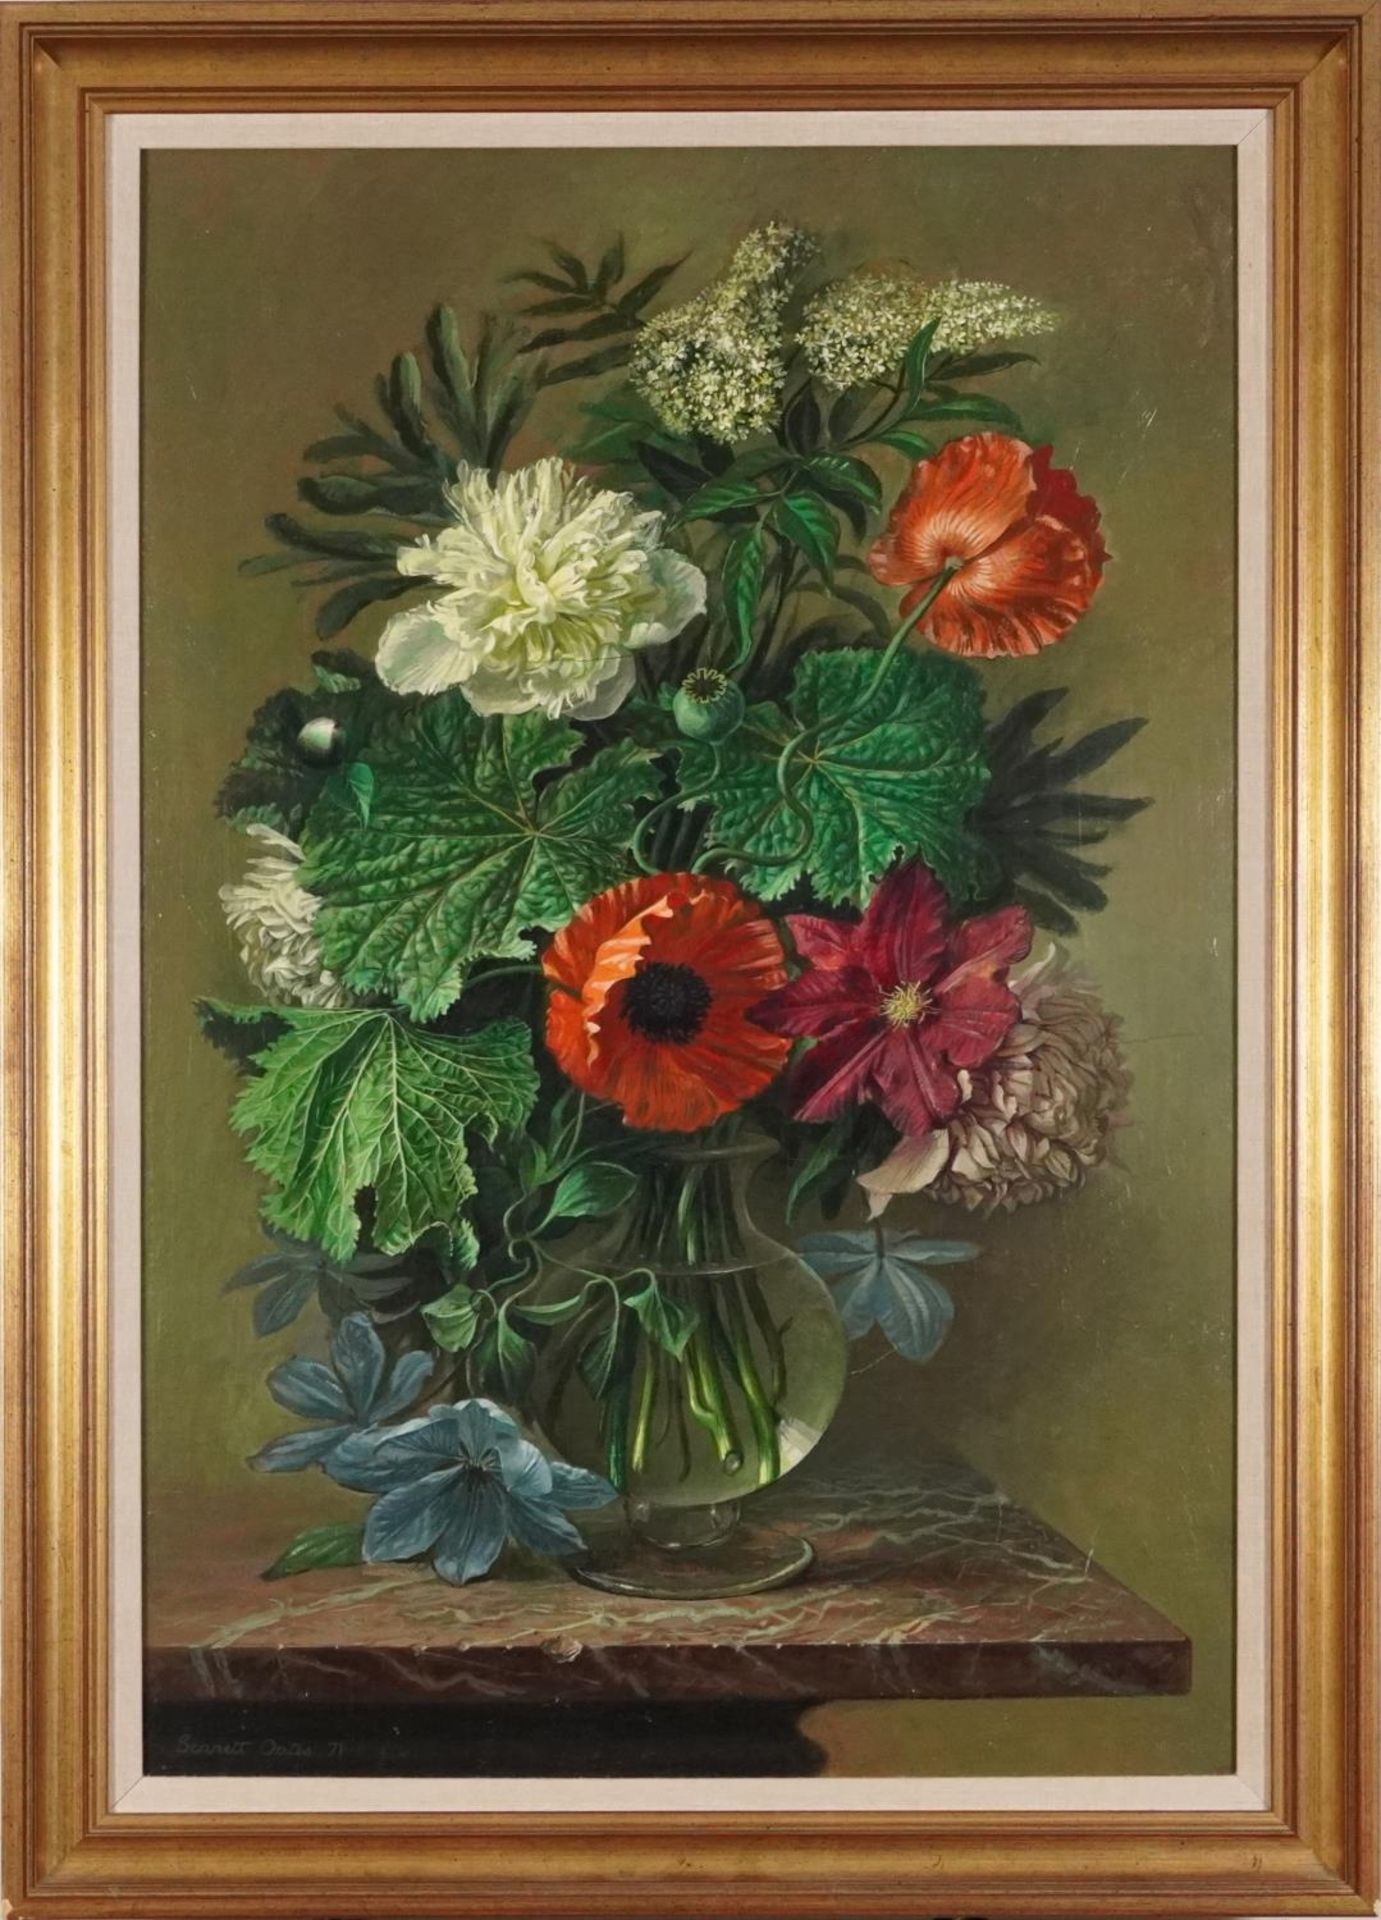 G Bennett Oates 1971 - Mixed flowers in a glass vase, oil on canvas, Stacy Marks inscribed label - Image 2 of 9